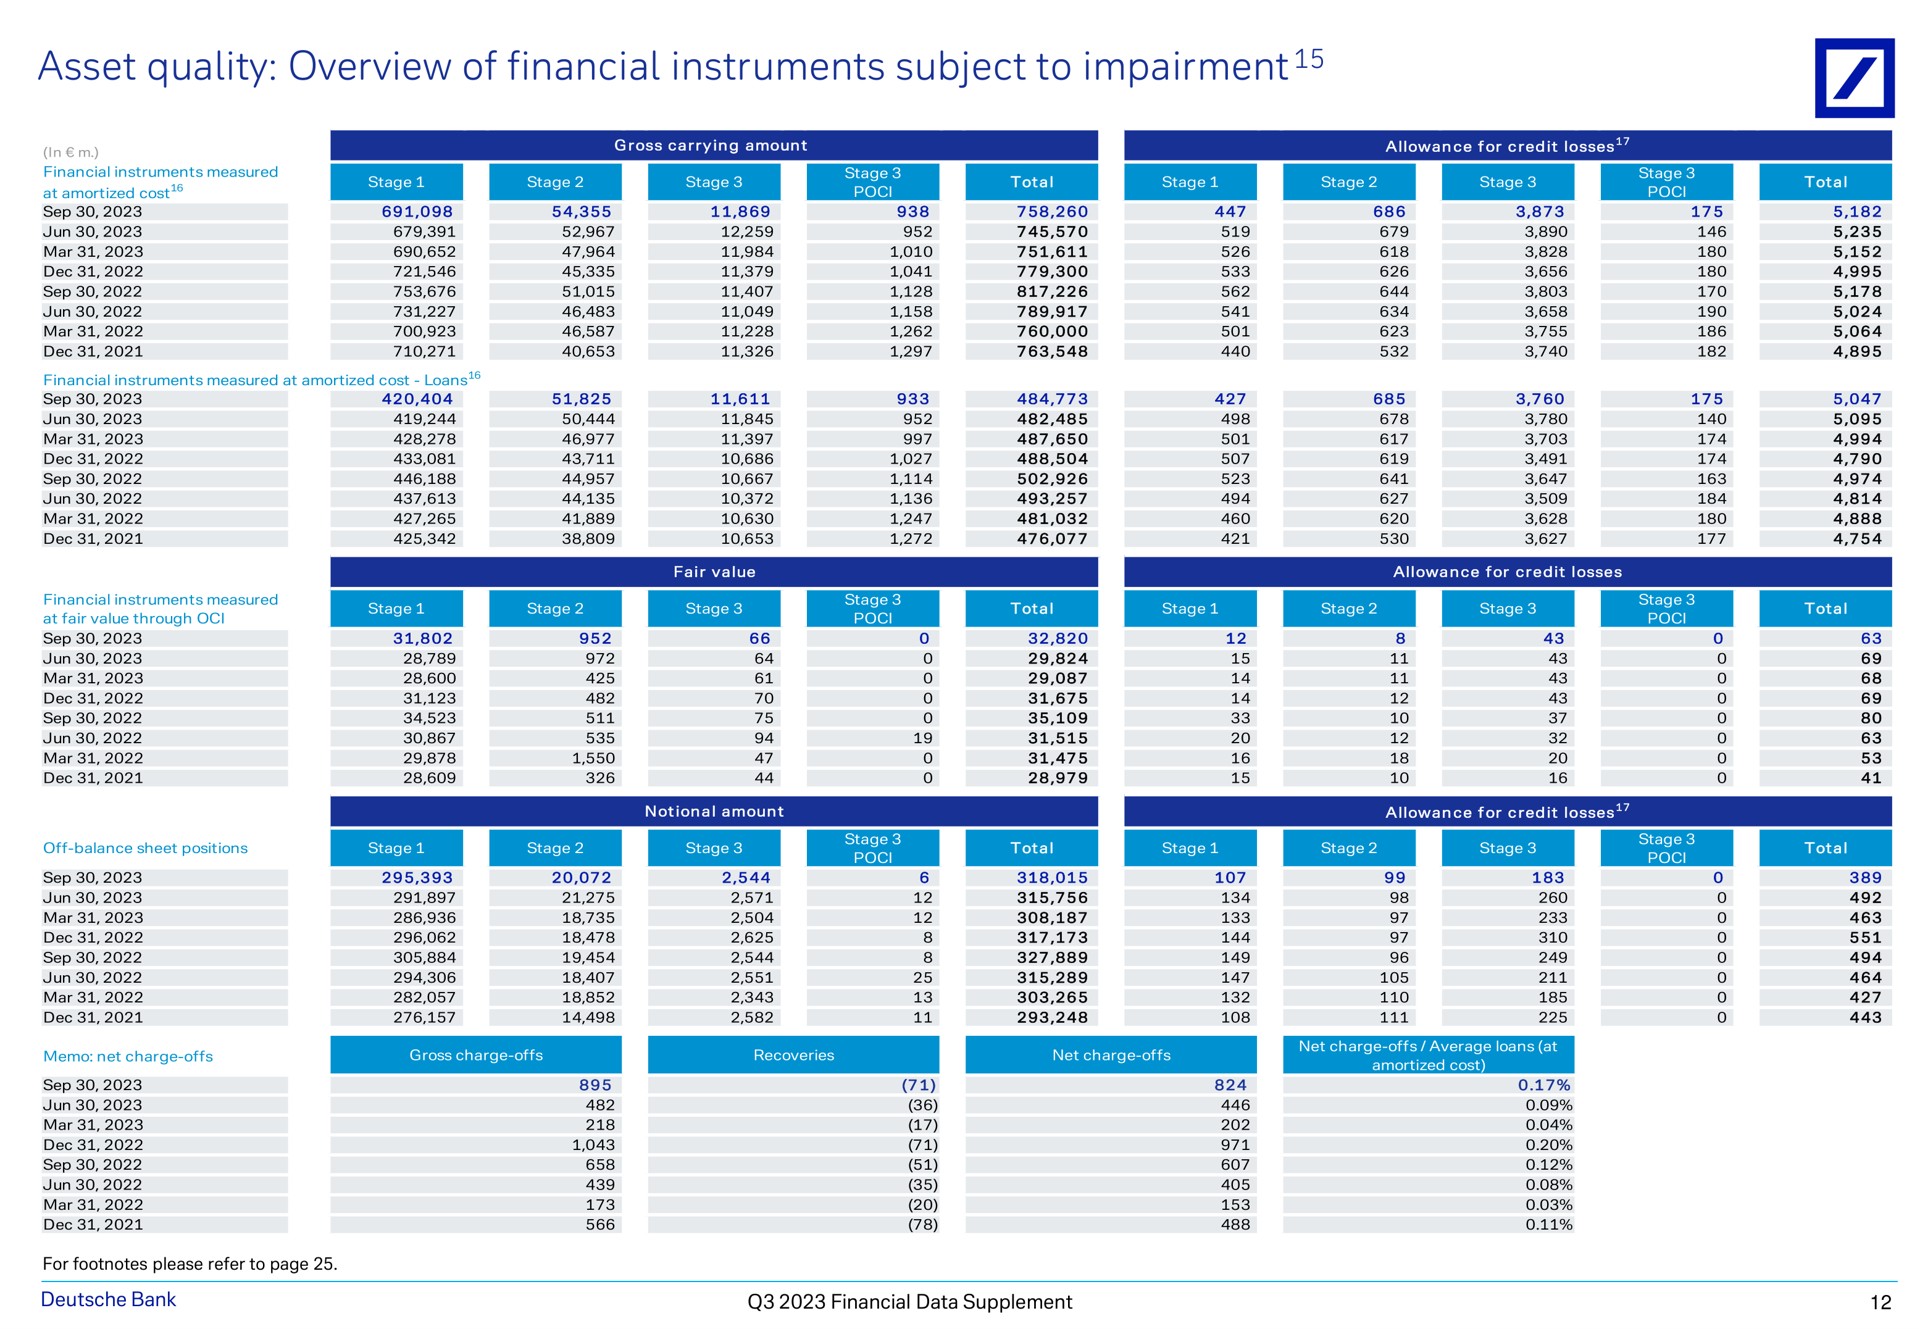 asset quality overview of financial instruments subject to impairment sas a for footnotes please refer page bank data supplement | Deutsche Bank